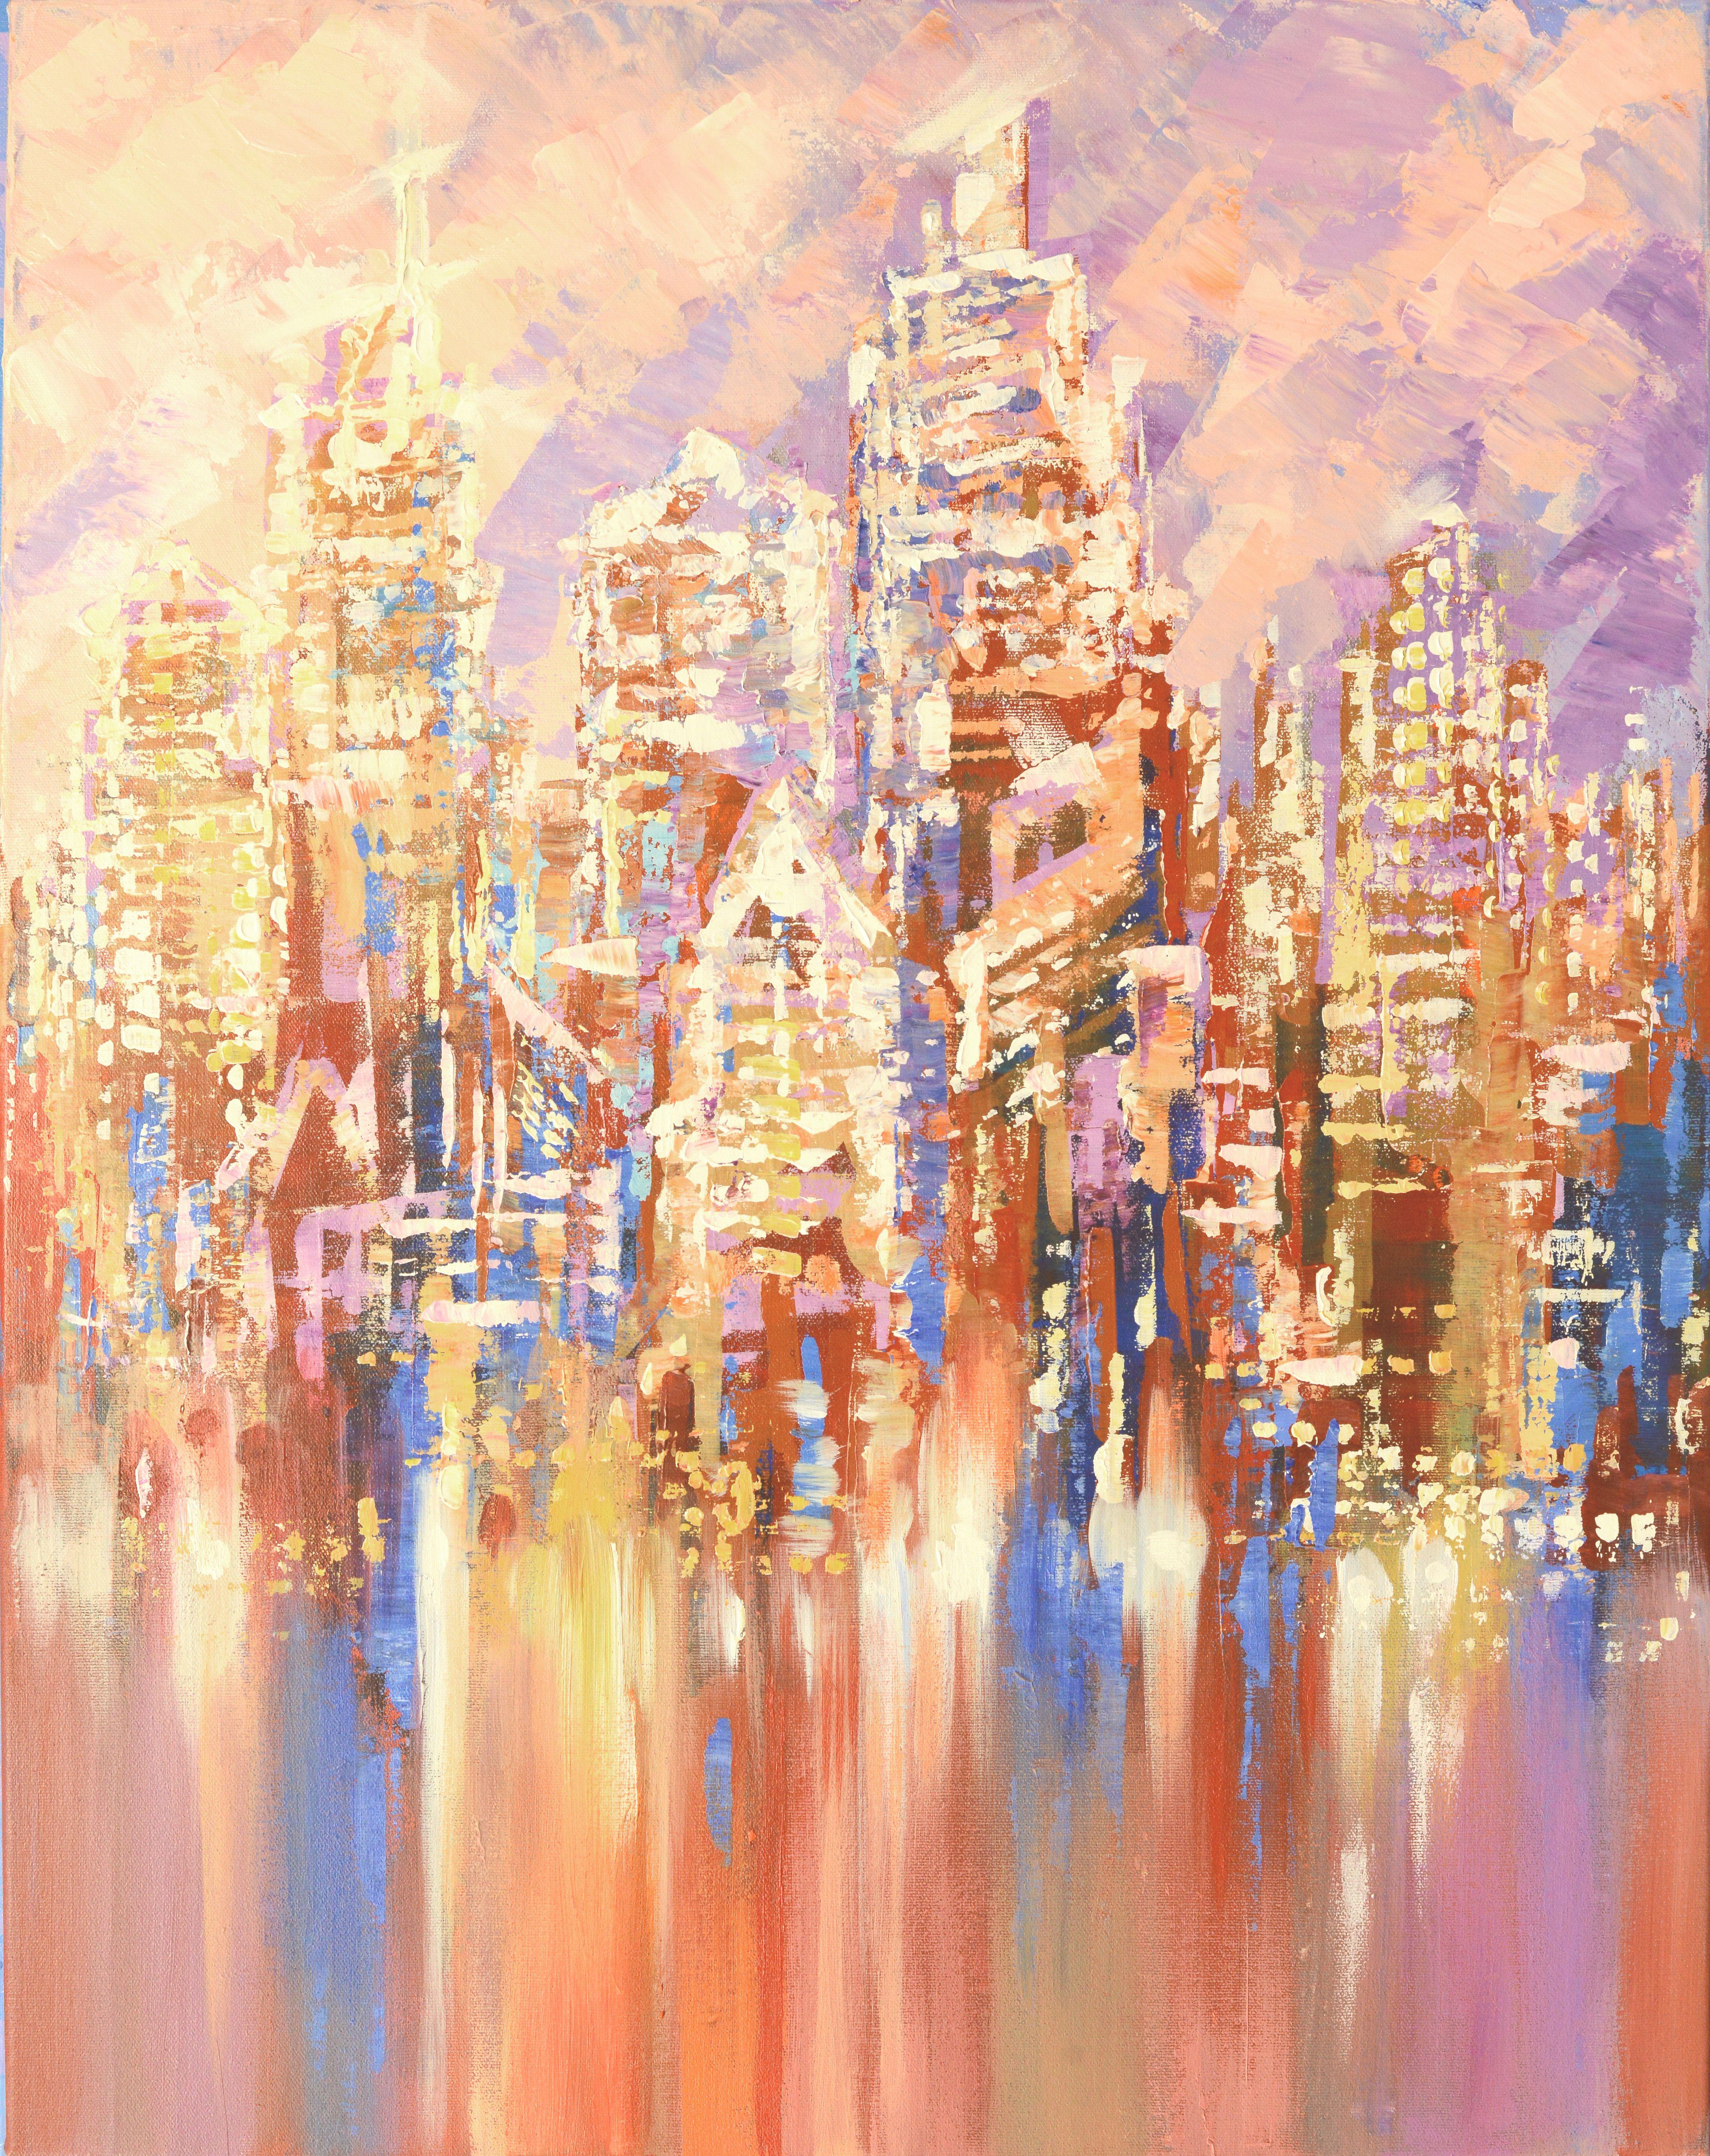 NYC REFLECTIONS, Painting, Acrylic on Canvas 2